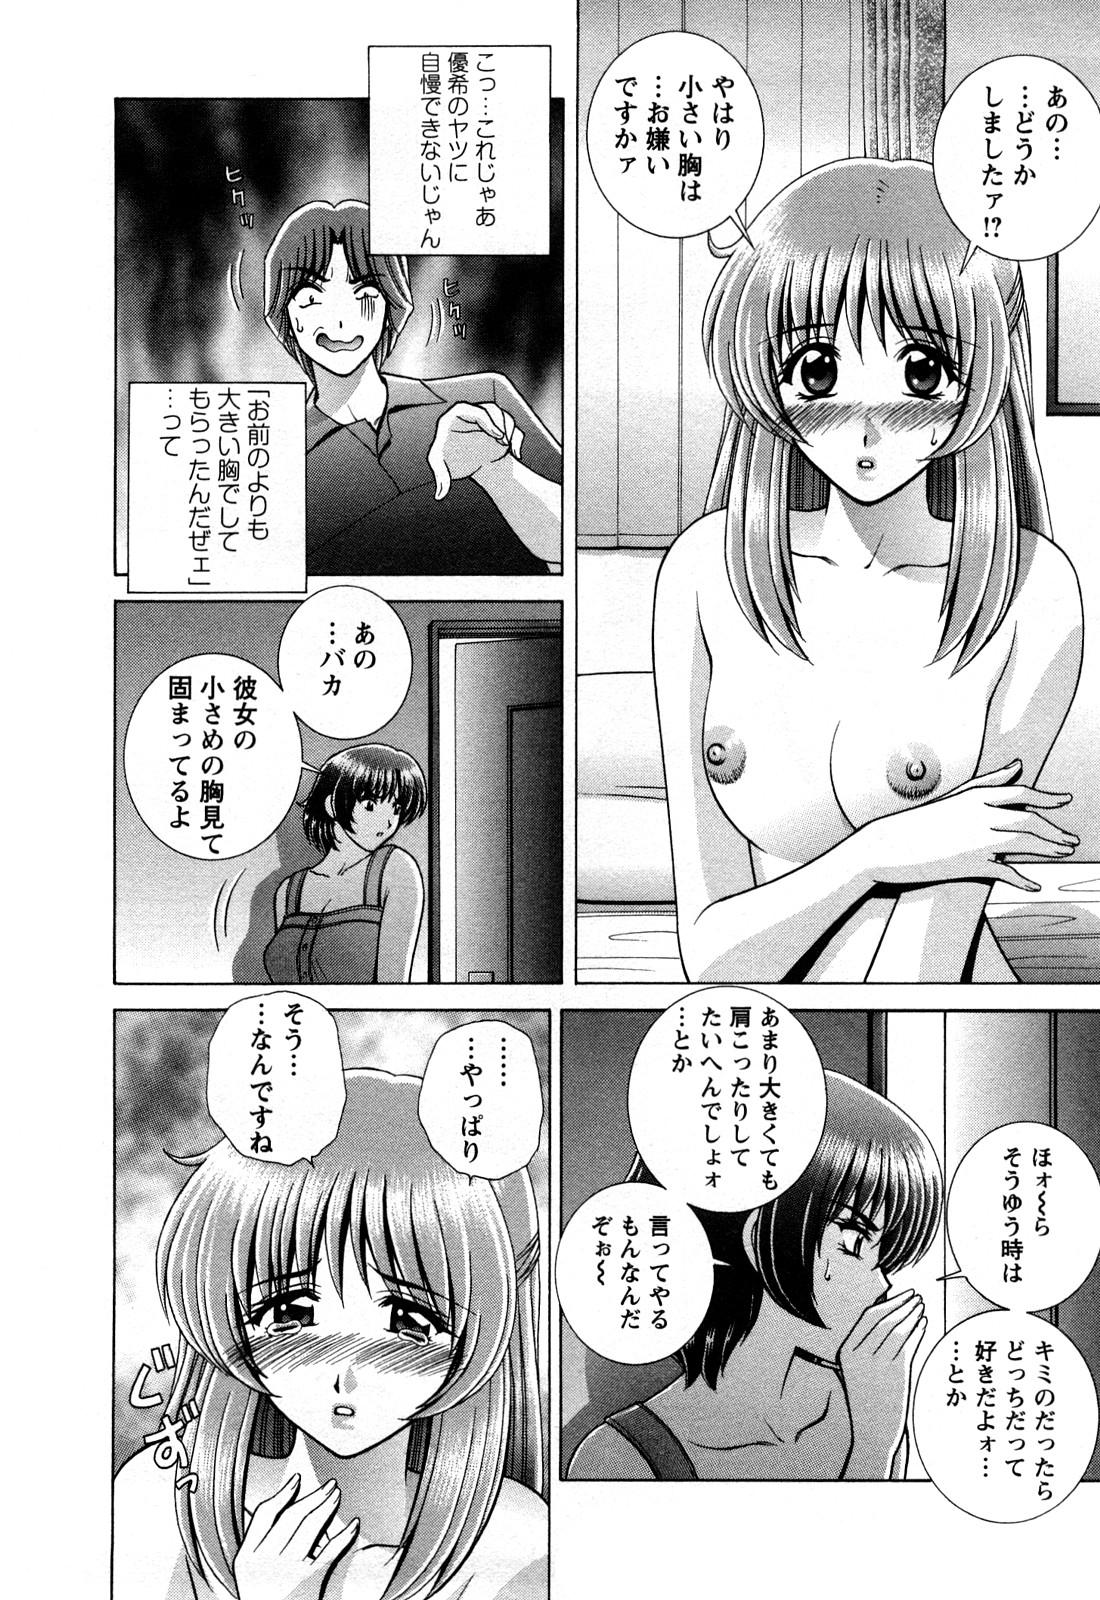 Pegging Battle Oppai Camgirl - Page 10